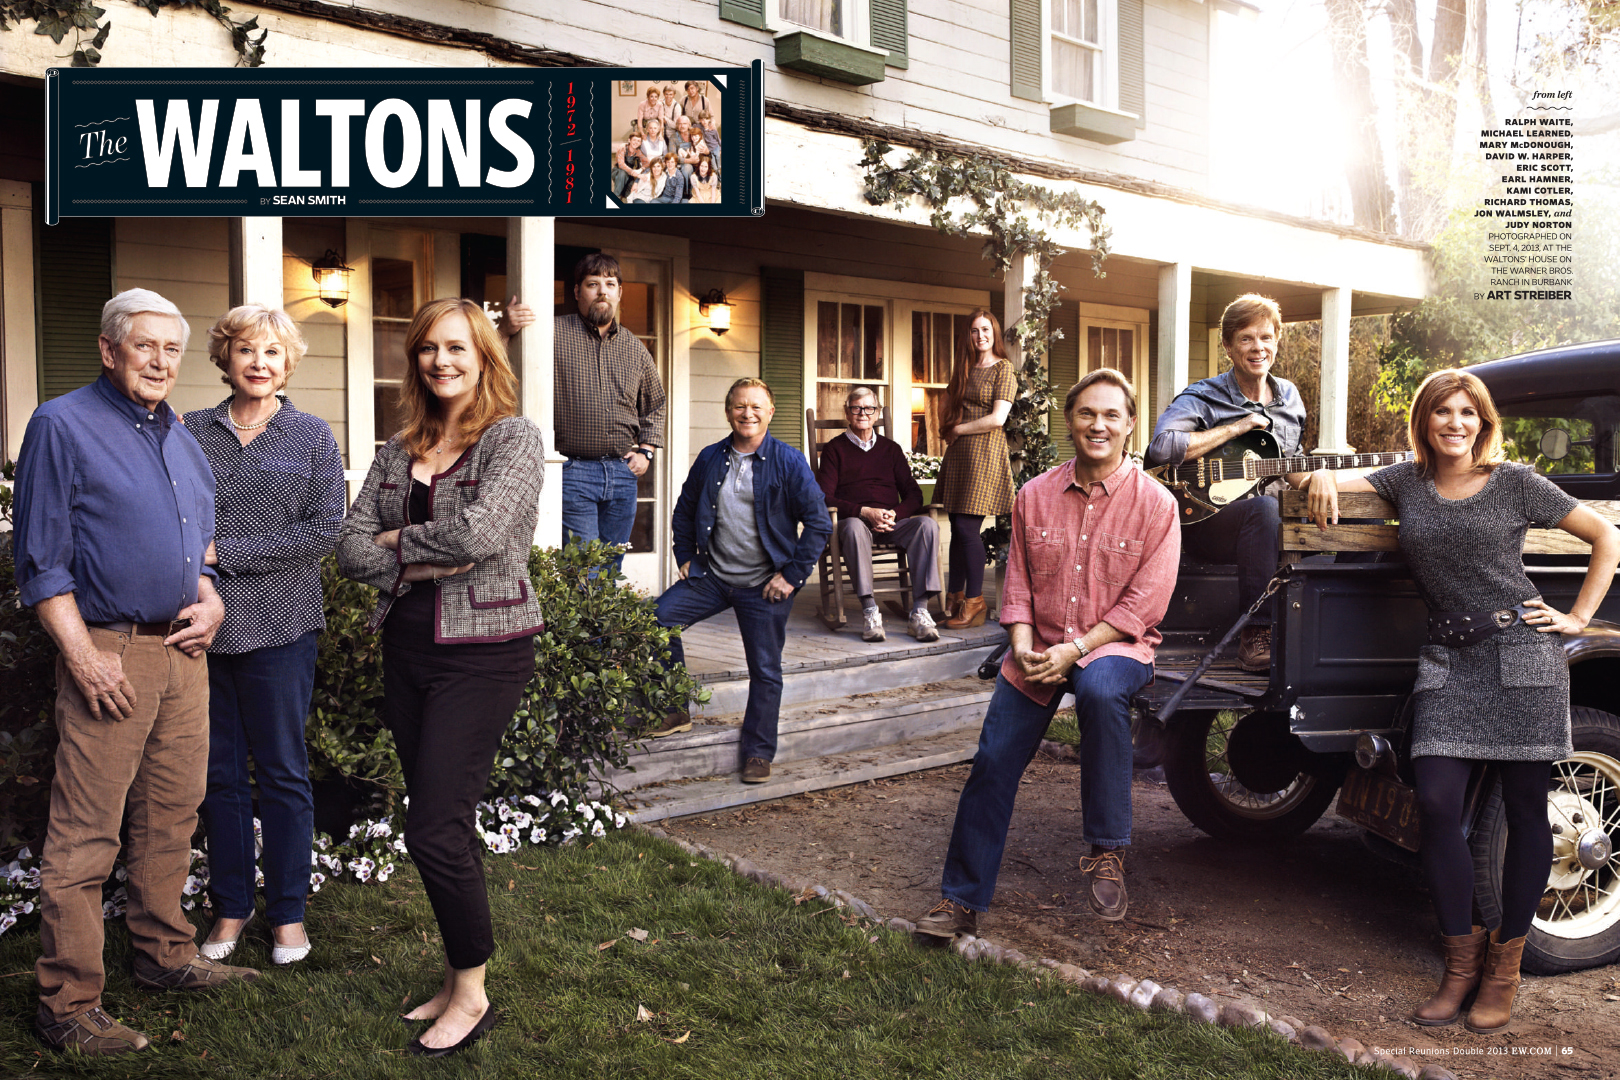 Amazing The Waltons Pictures & Backgrounds